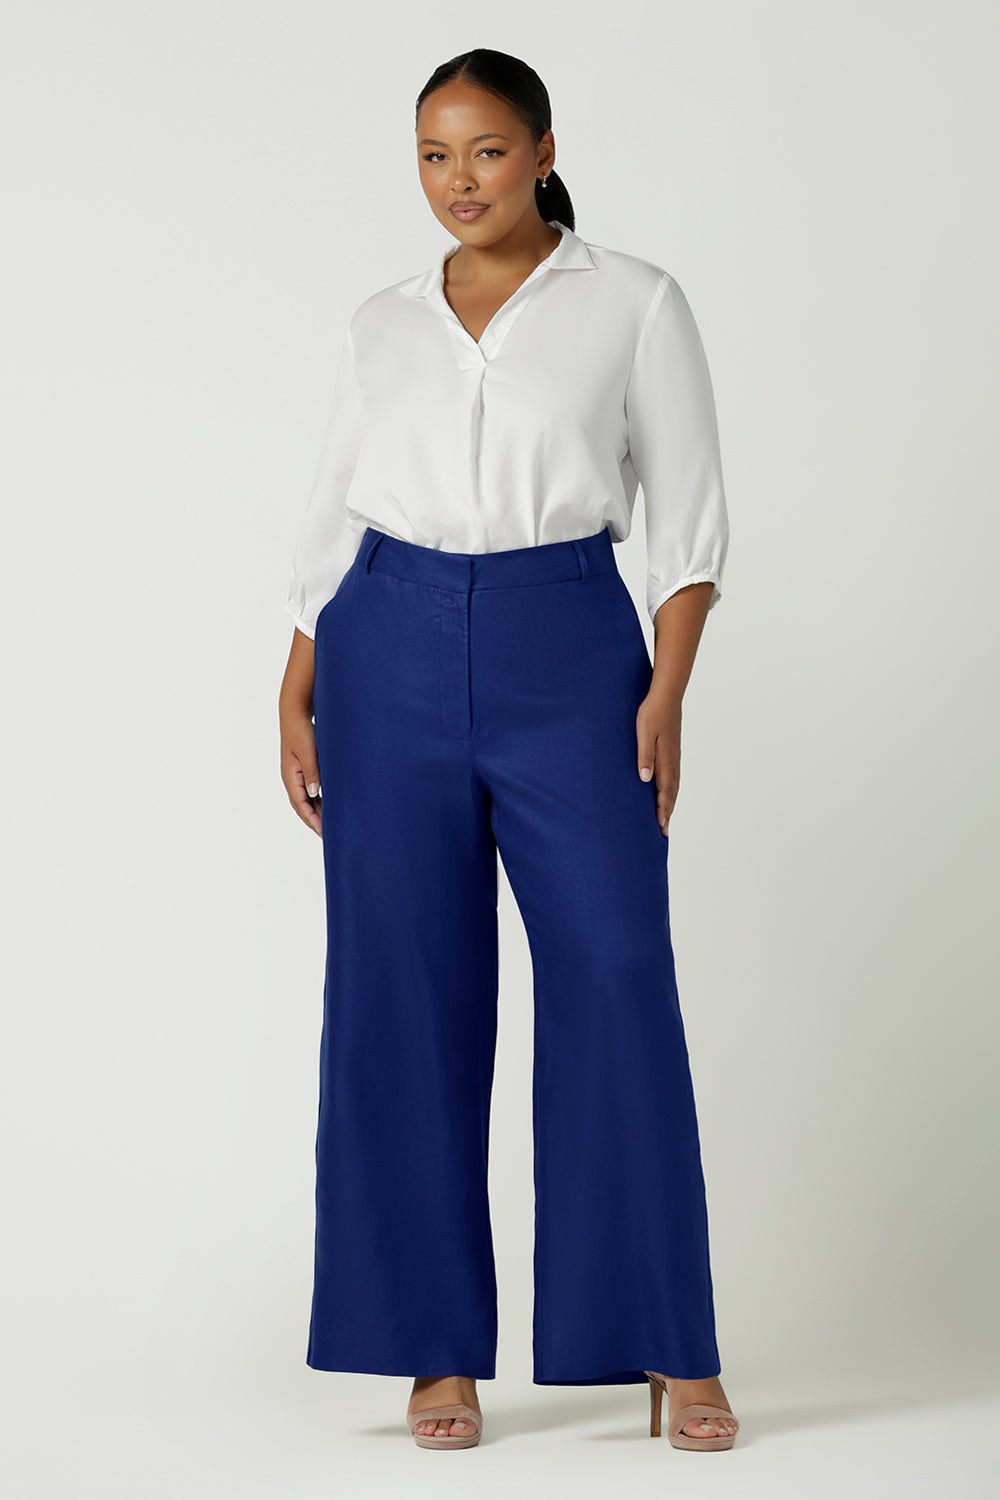 Woman wears a size 16 Ronnie Pant in Cobalt Linen. A high waisted pant in cobalt with a zip fly front, pocket detail and belt loops. Styled back with an Arley Shirt in White. Made in Australia for women size 8 - 24.